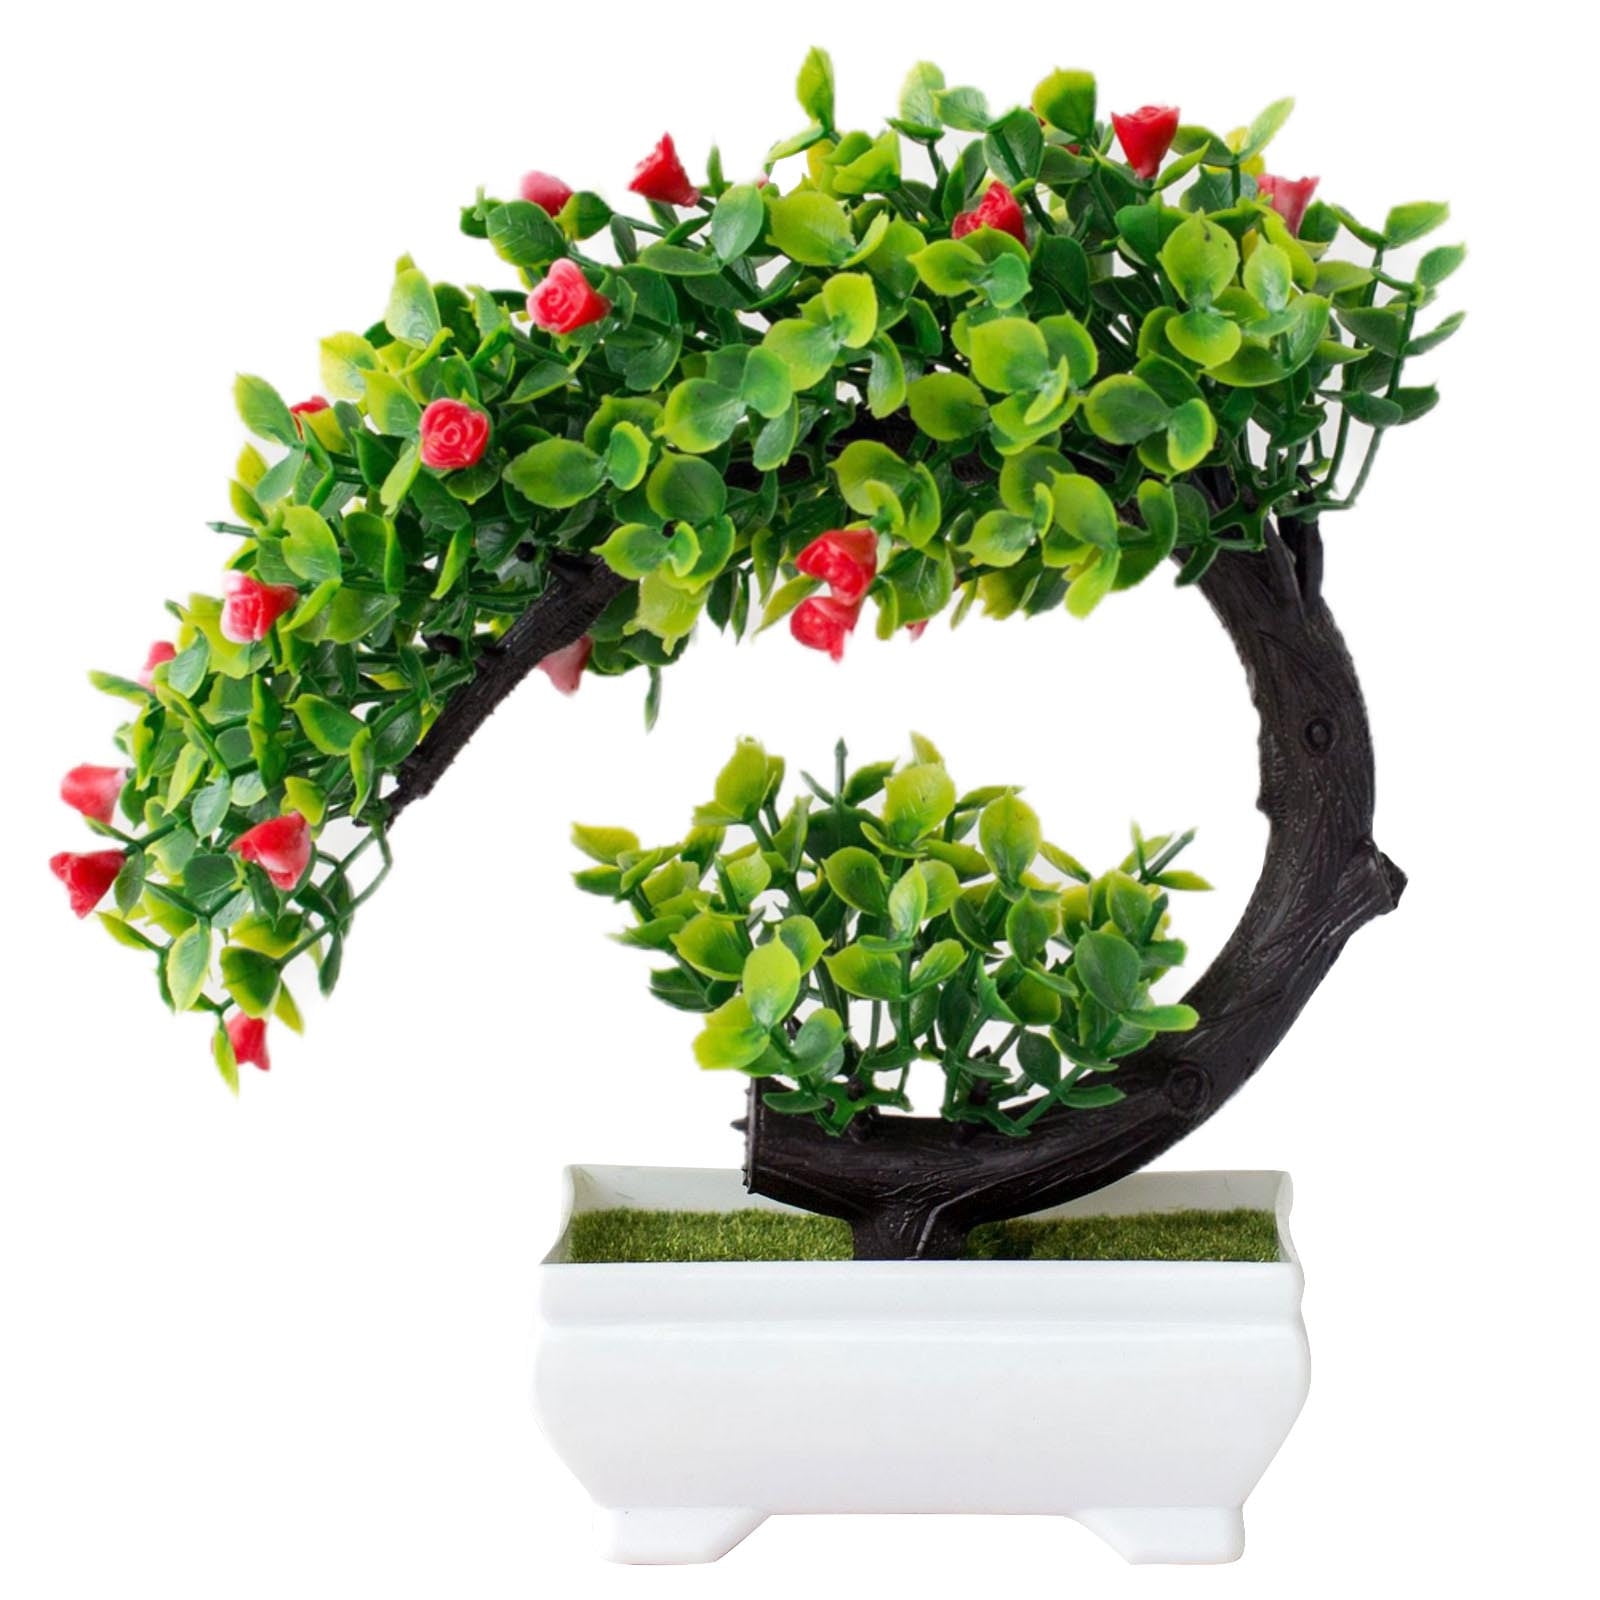 Artificial Plant Tree Bonsai Fake Potted Ornament Home Garden Decor Gift Awesome 